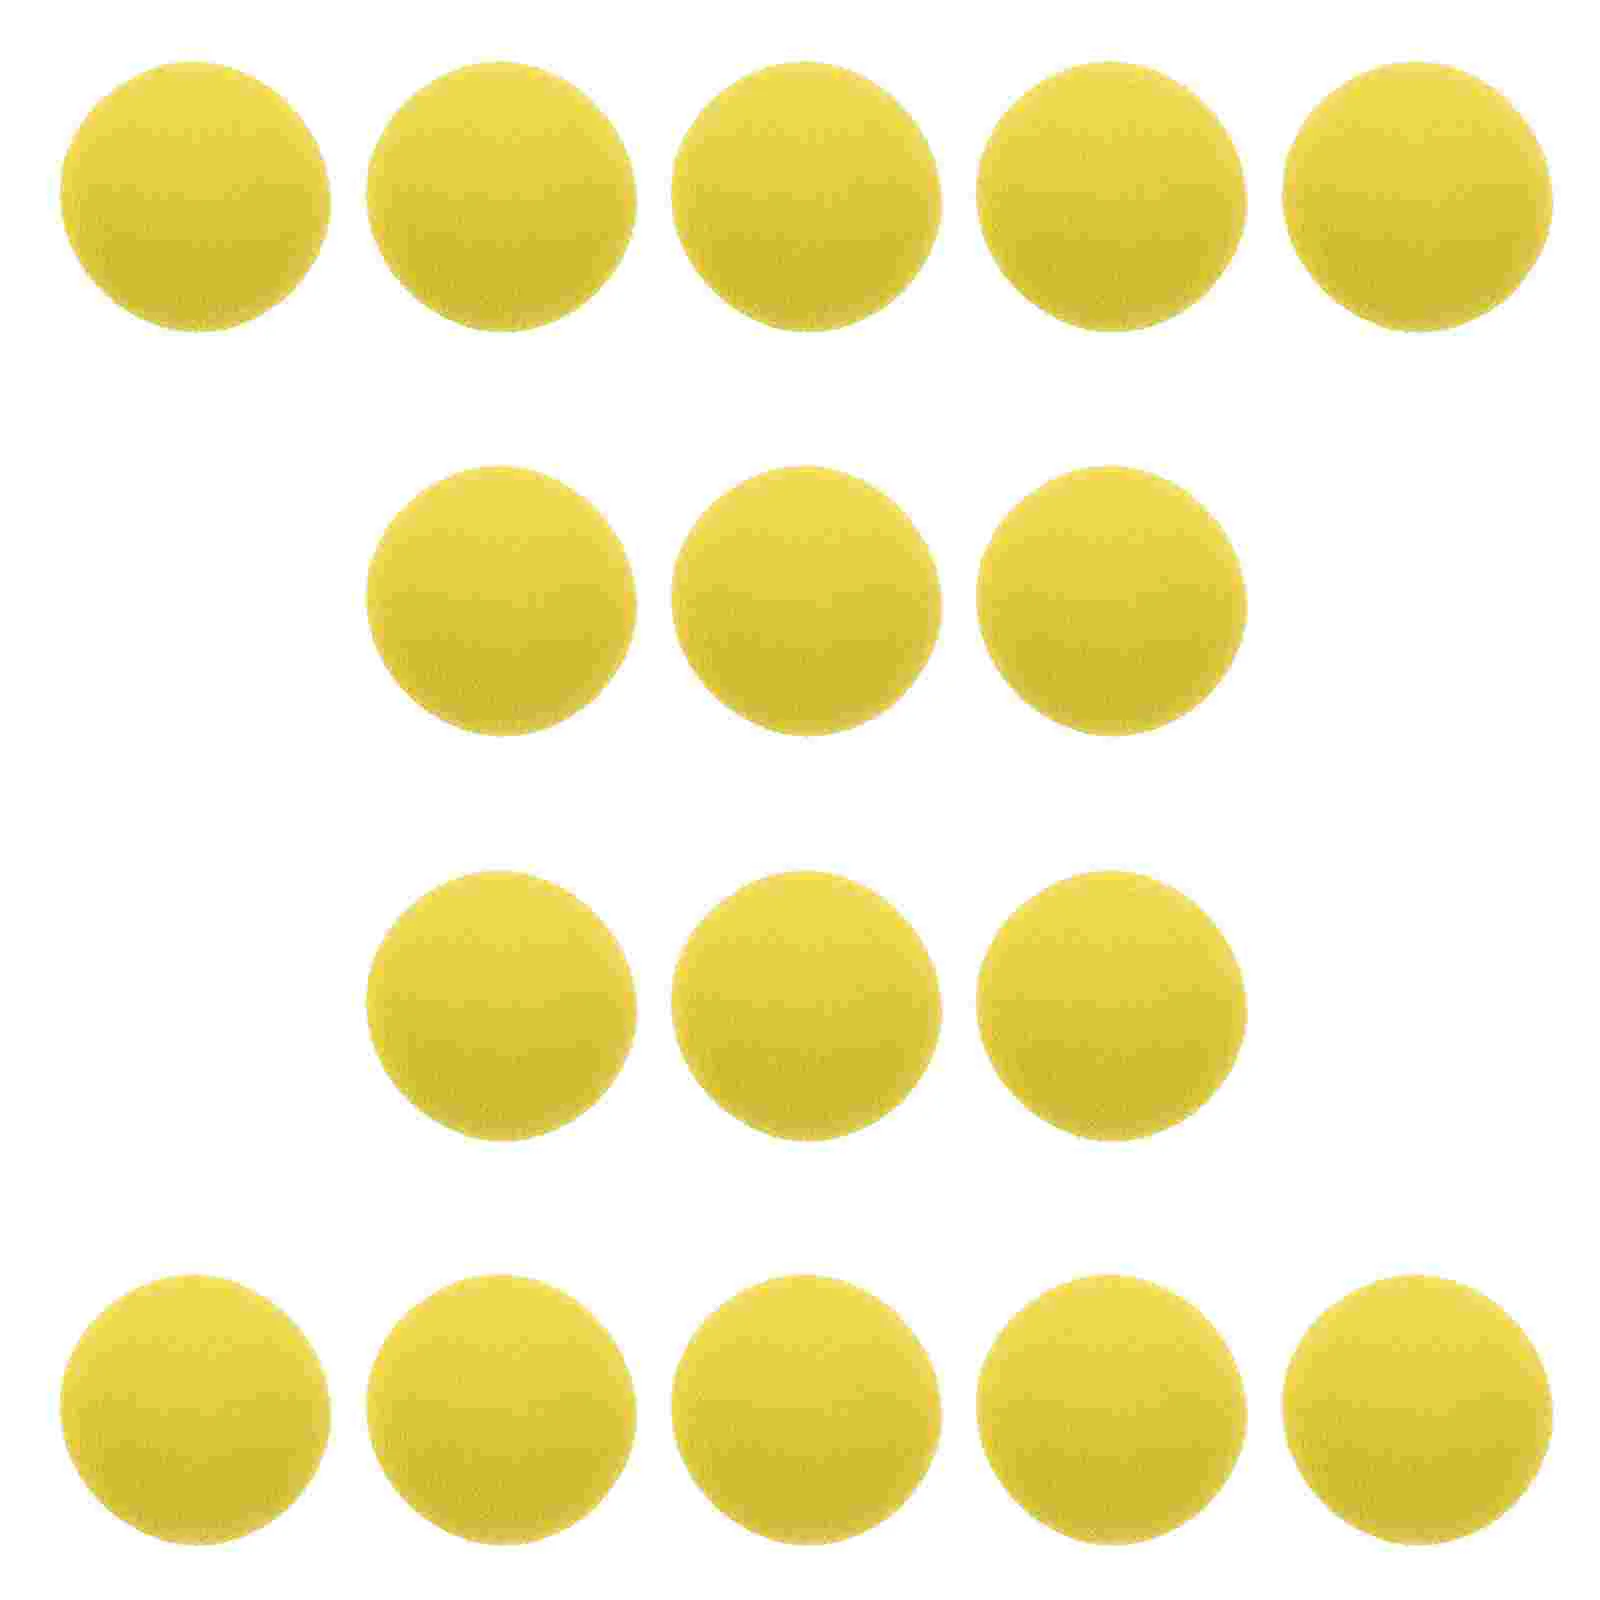 

24 Pcs Hit Me Duck Colored Foam Balls Toy Round Shooting Games EVA Kids Toys Child Outdoor Playsets Gel polka dot cups